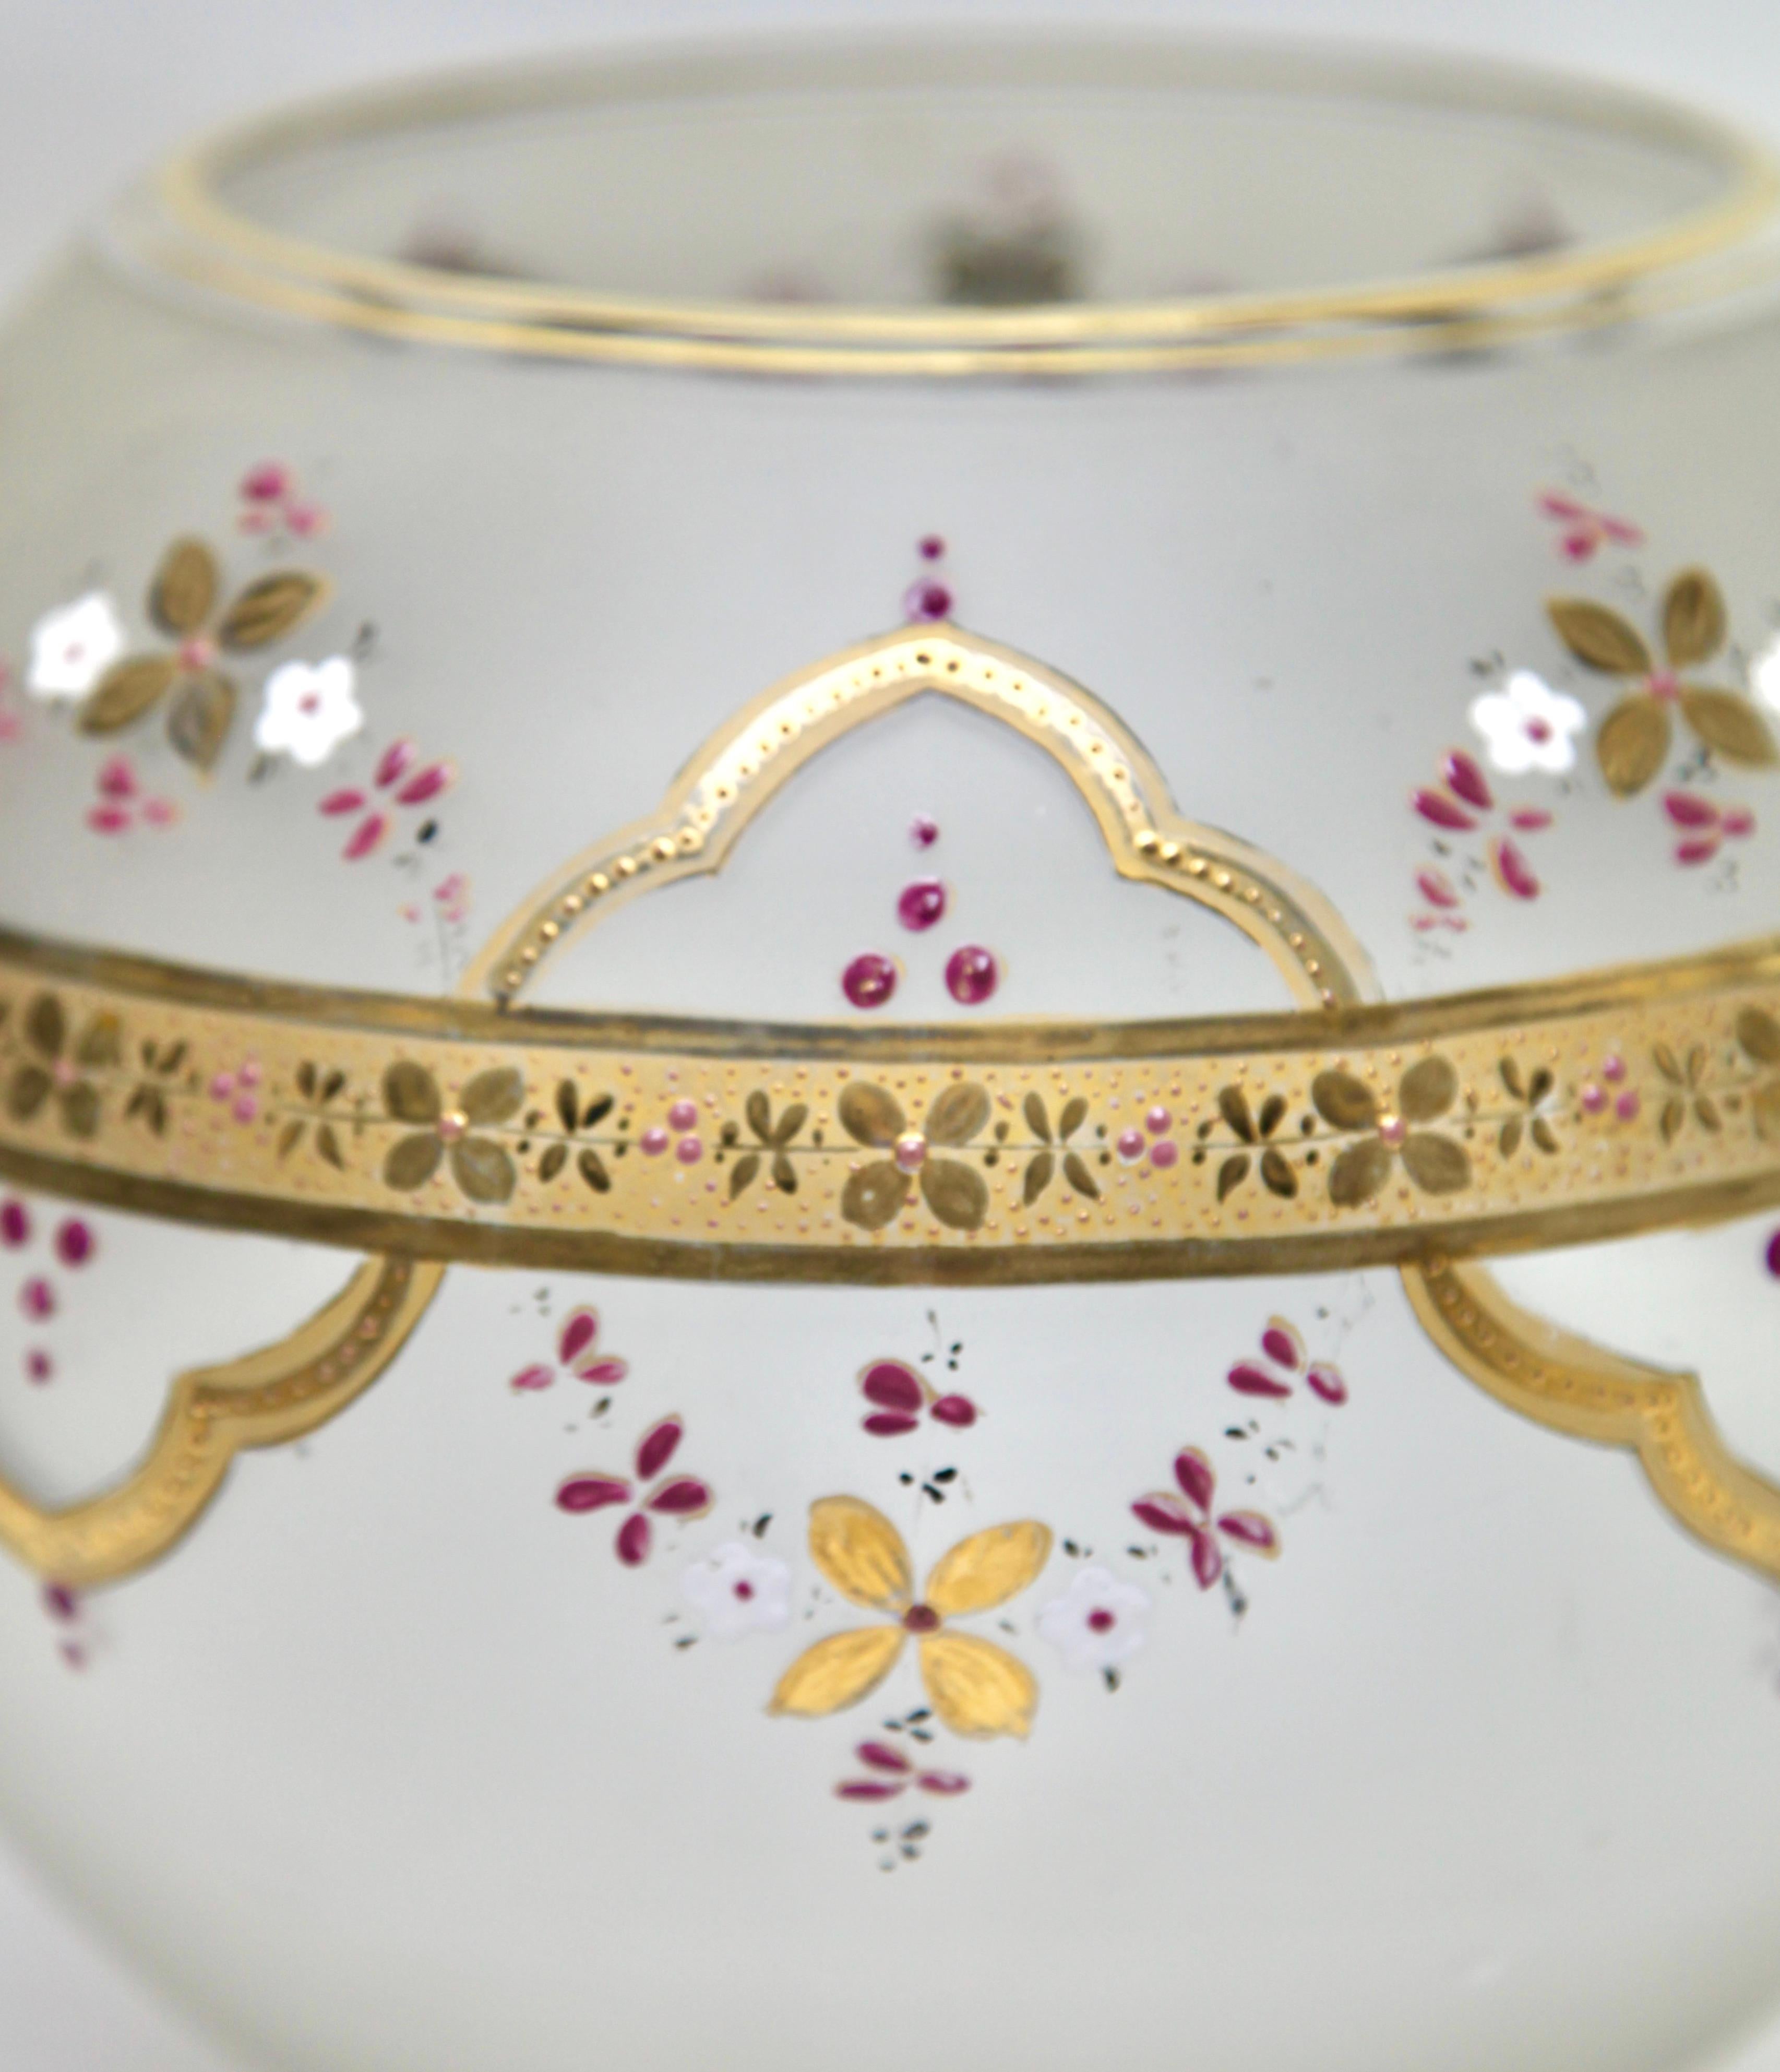 Bohemian Enameled, Gold Edging Satin Glass Punch Bowl Lid and Spoon For Sale 2